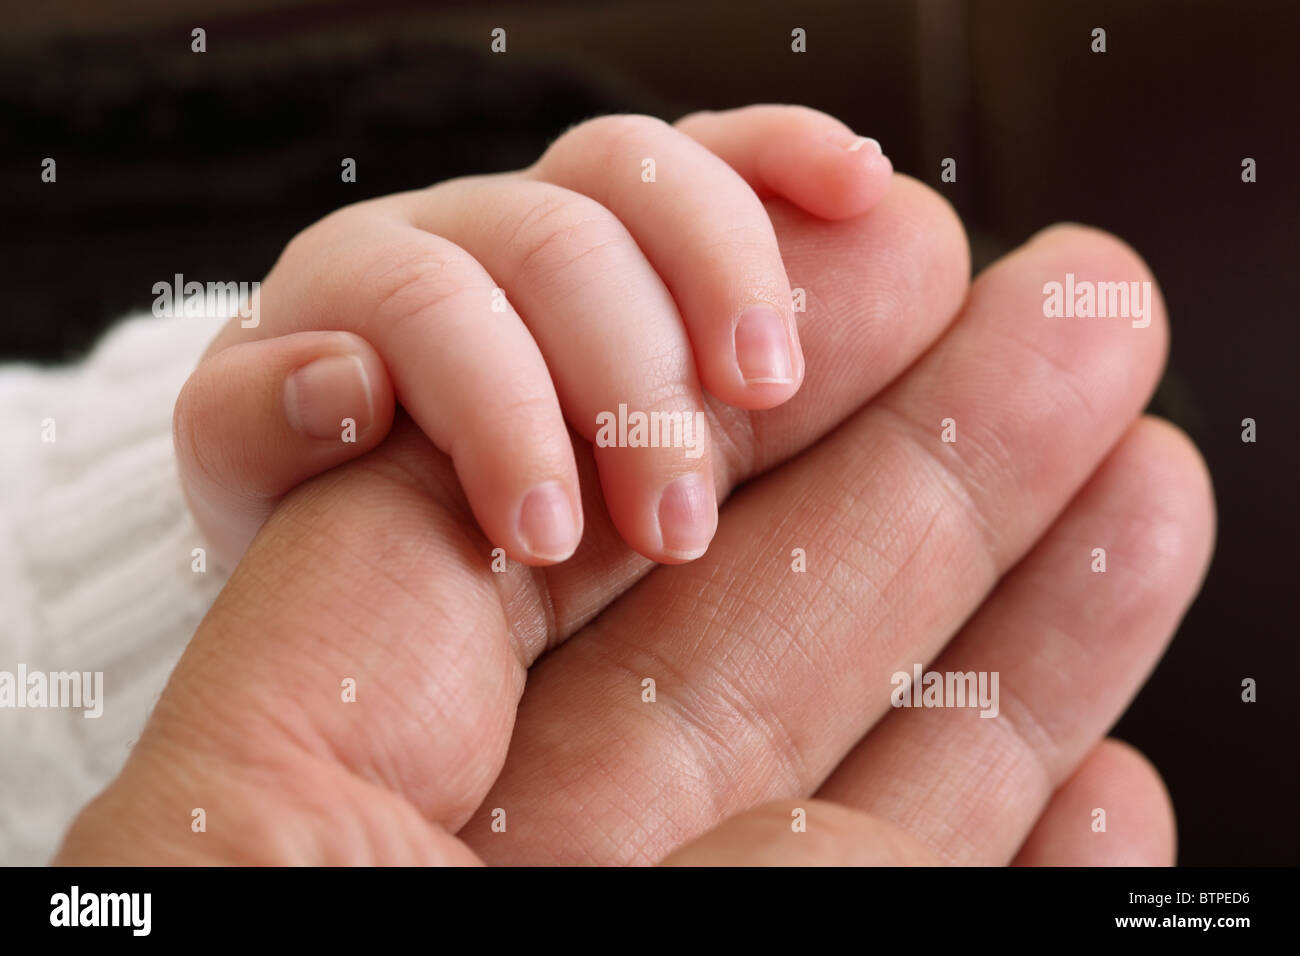 Newborn baby holding hands with his father Stock Photo